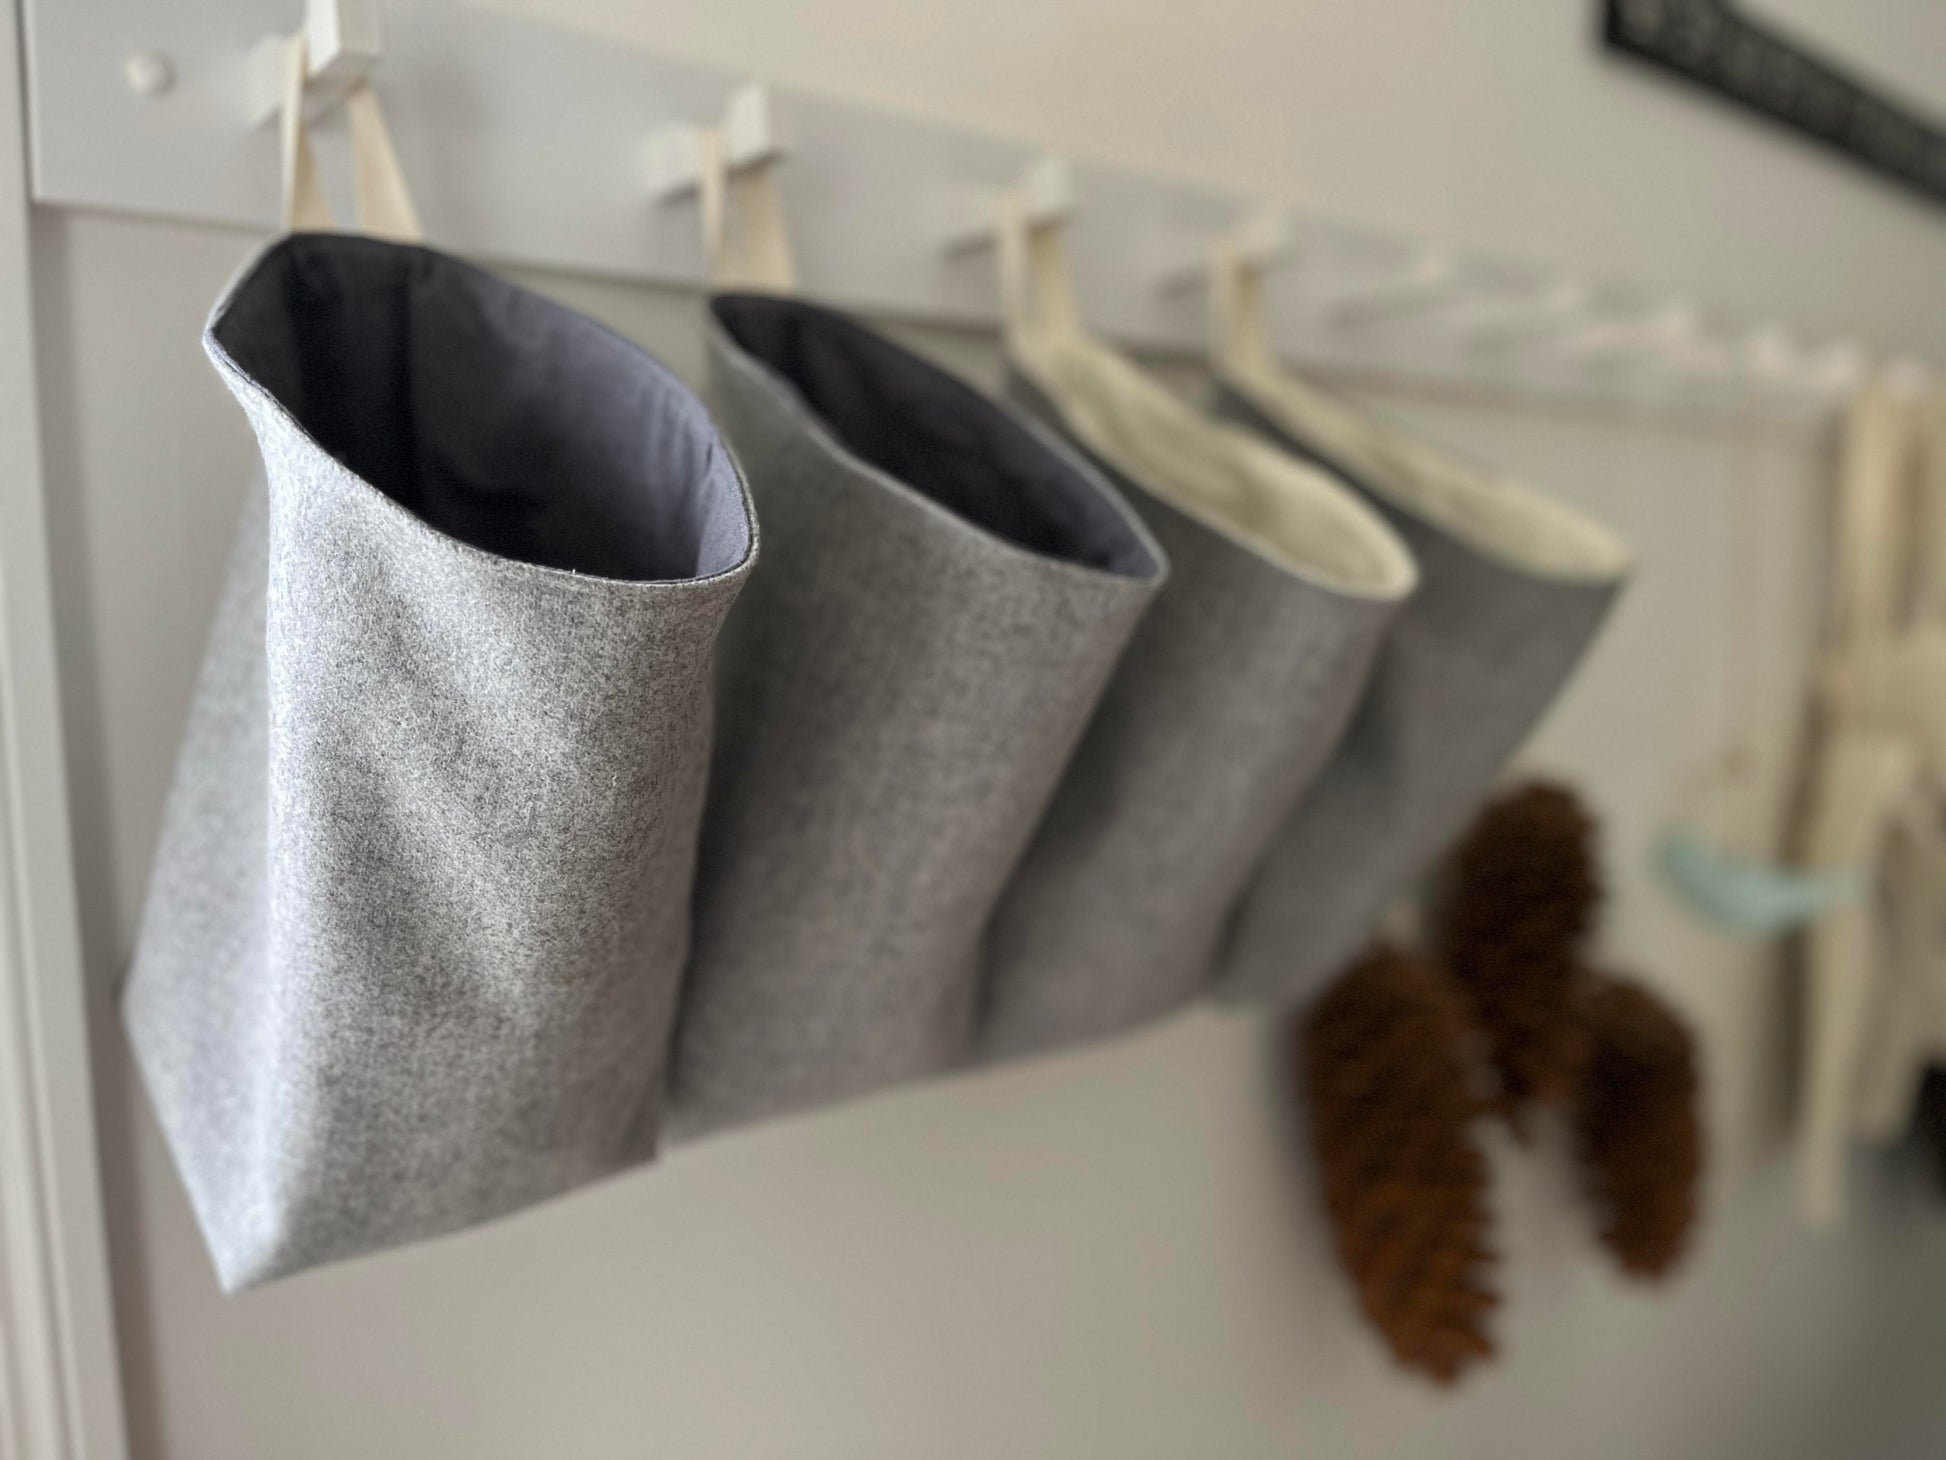 4 grey all purpose sacks hang from a white hanging rail in a foyer. A couple of pinecones are blurred in the distance hanging from the same rail.